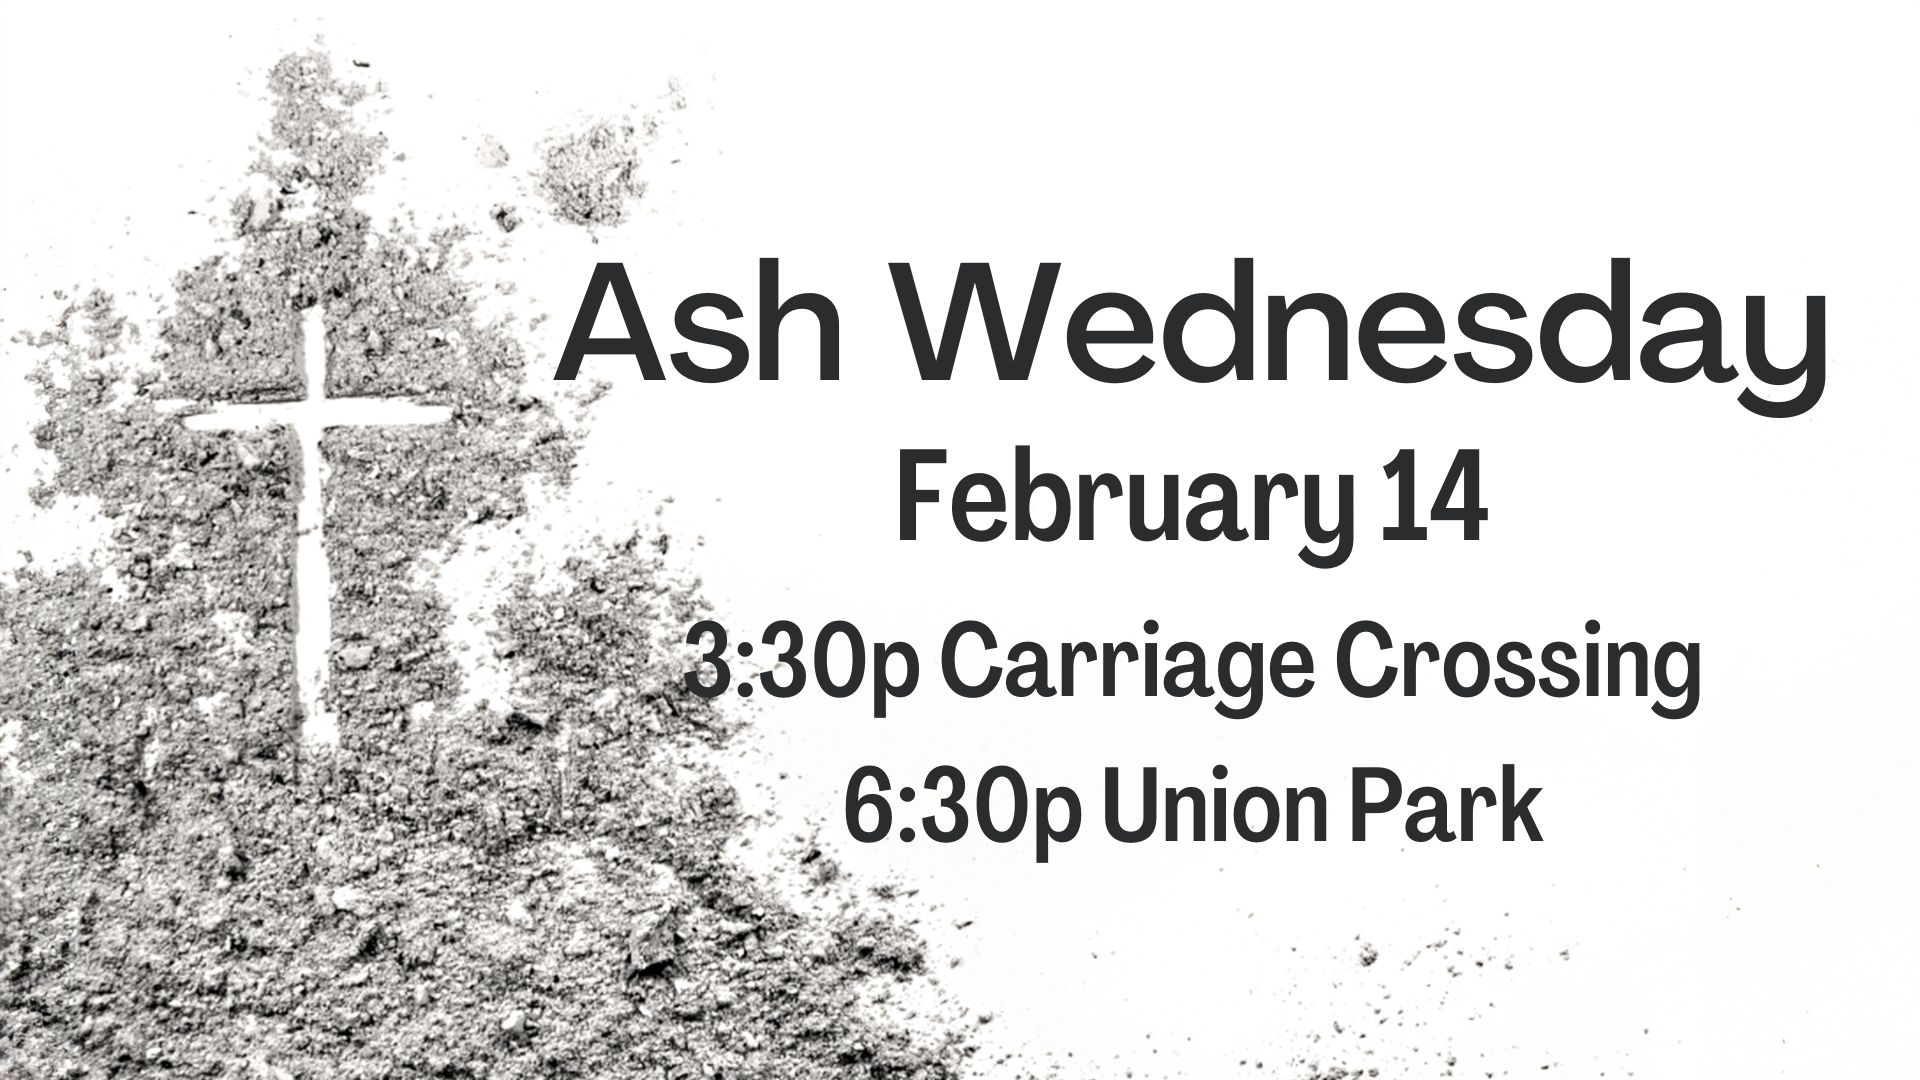 Faith Lutheran Church of McLean County invitation to Ash Wednesday observance